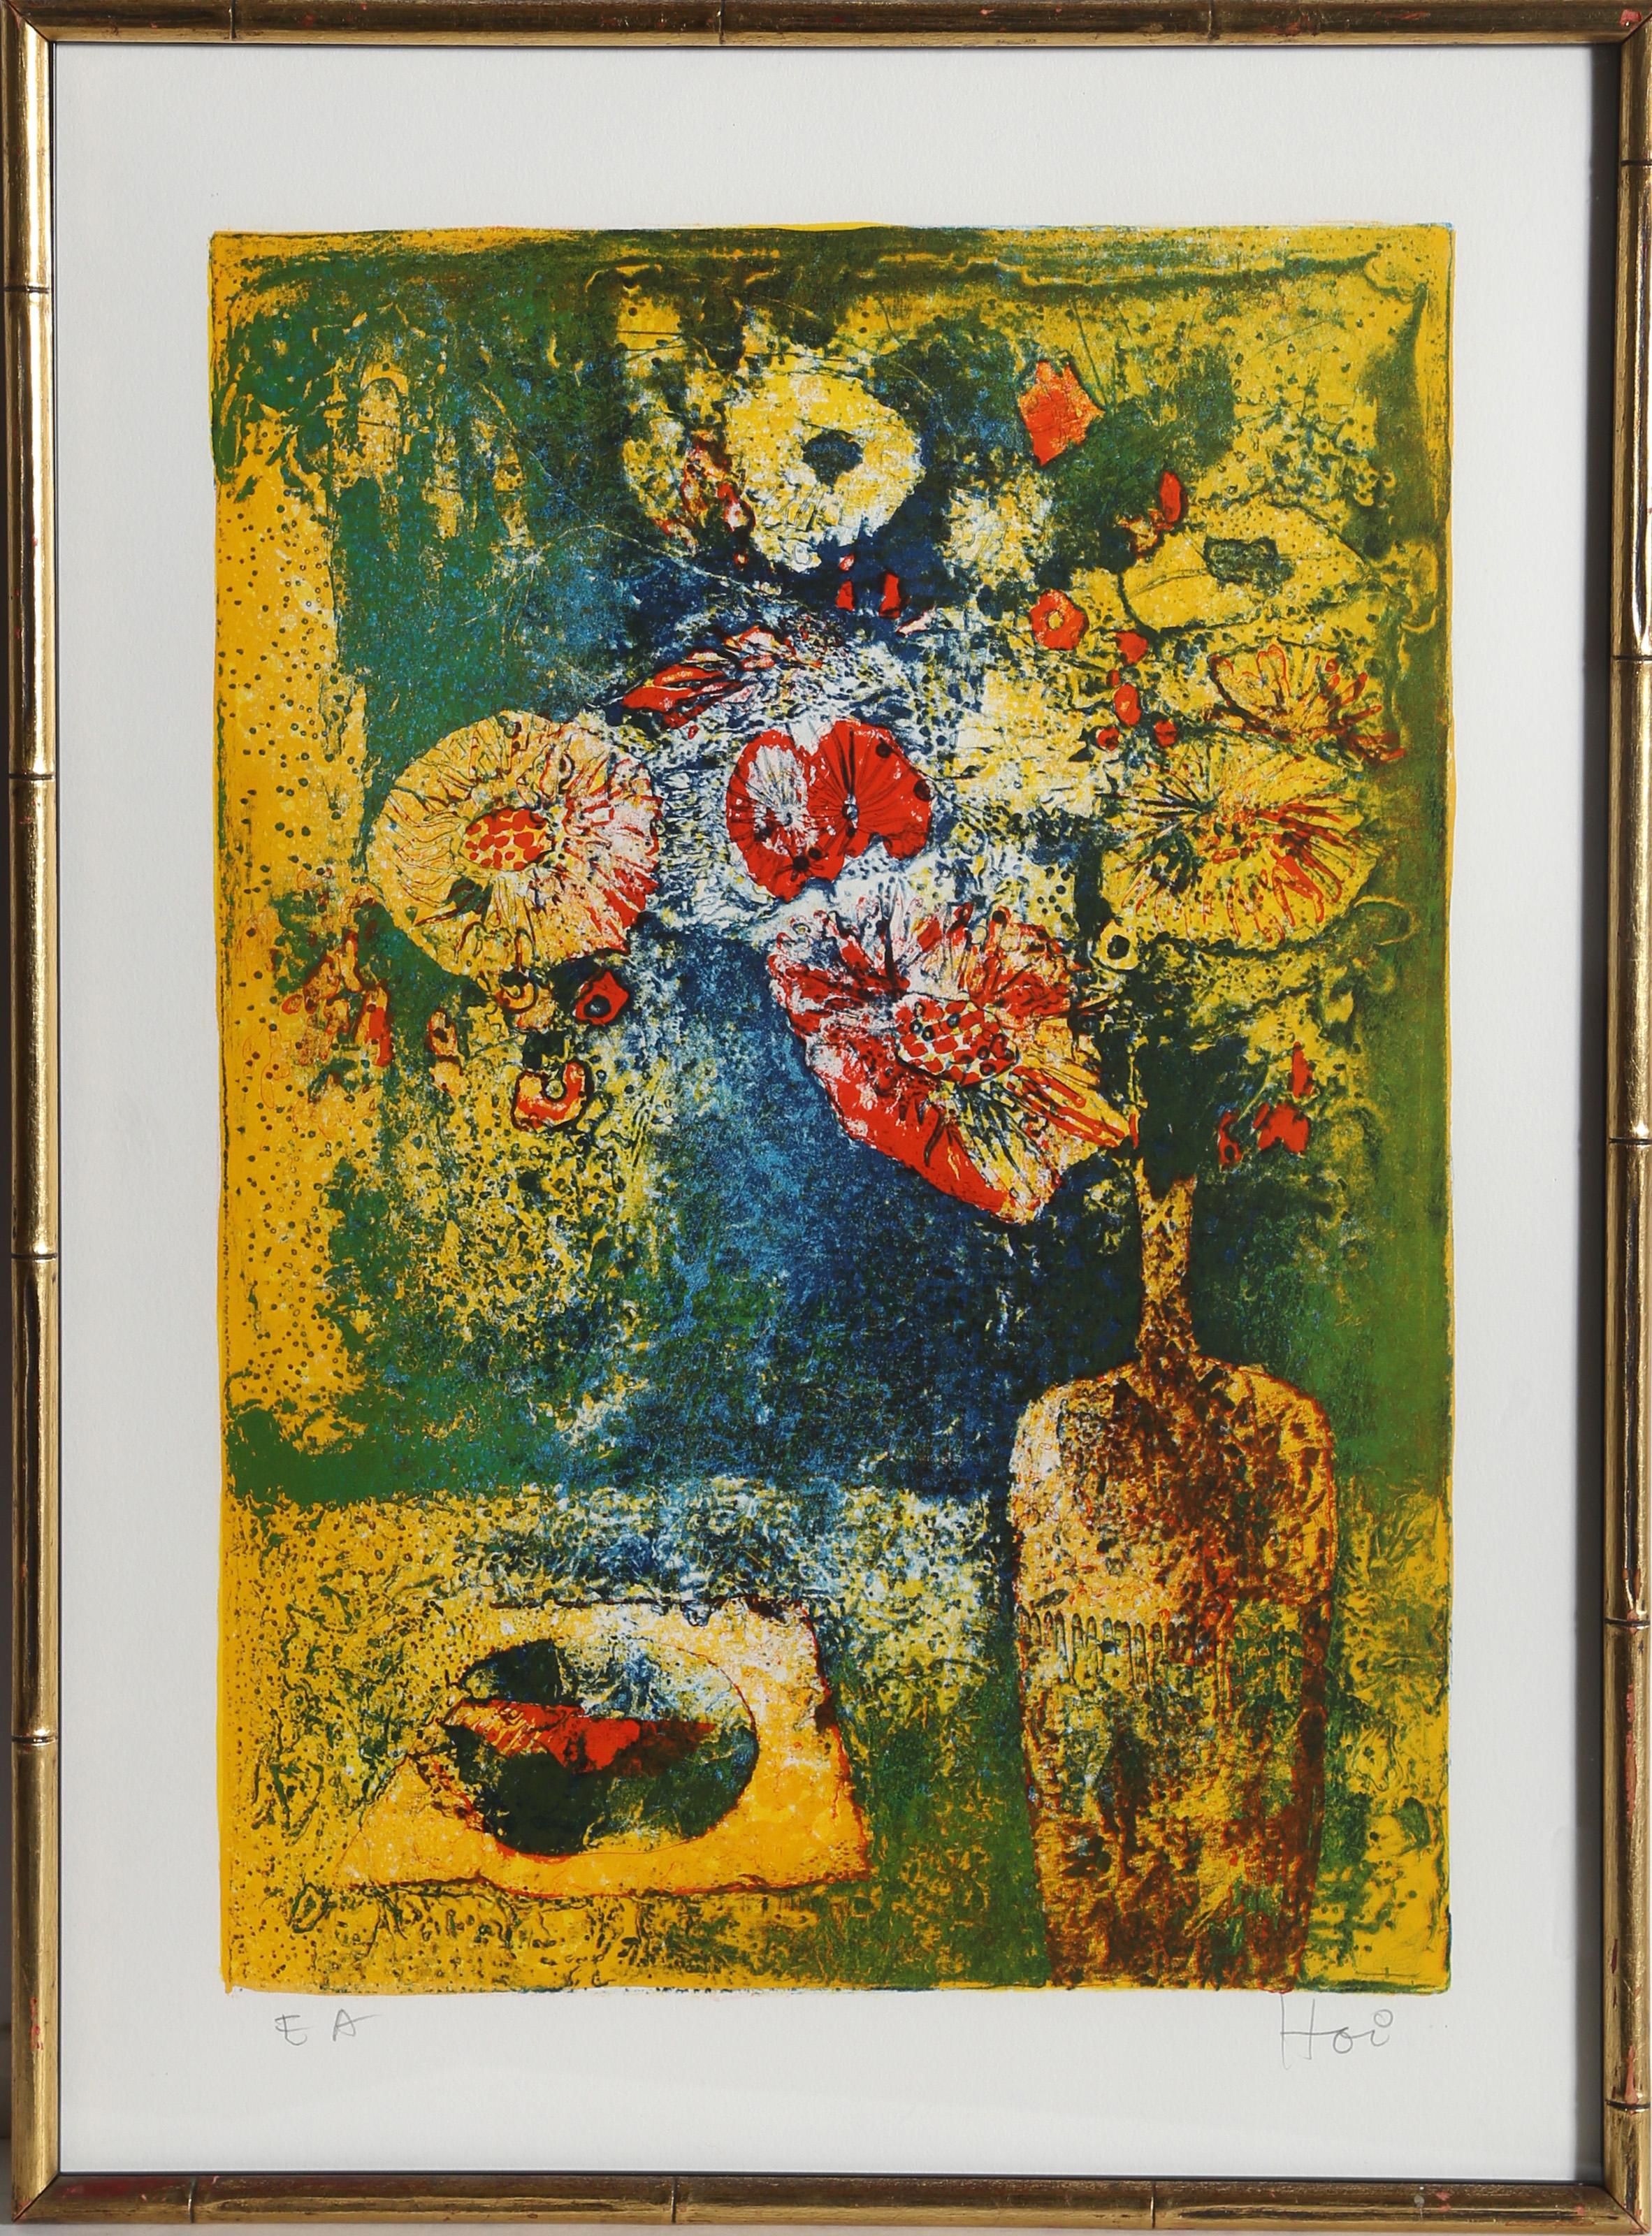 Lebadang (aka Hoi), Vietnamese (1922 - 2015) -  Flowers on Table. Year: circa 1980, Medium: Lithograph, signed in pencil, Edition: EA, Image Size: 18 x 12.5 inches, Frame Size: 23 x 16.5 inches, Description: A bright, almost neon lithograph of